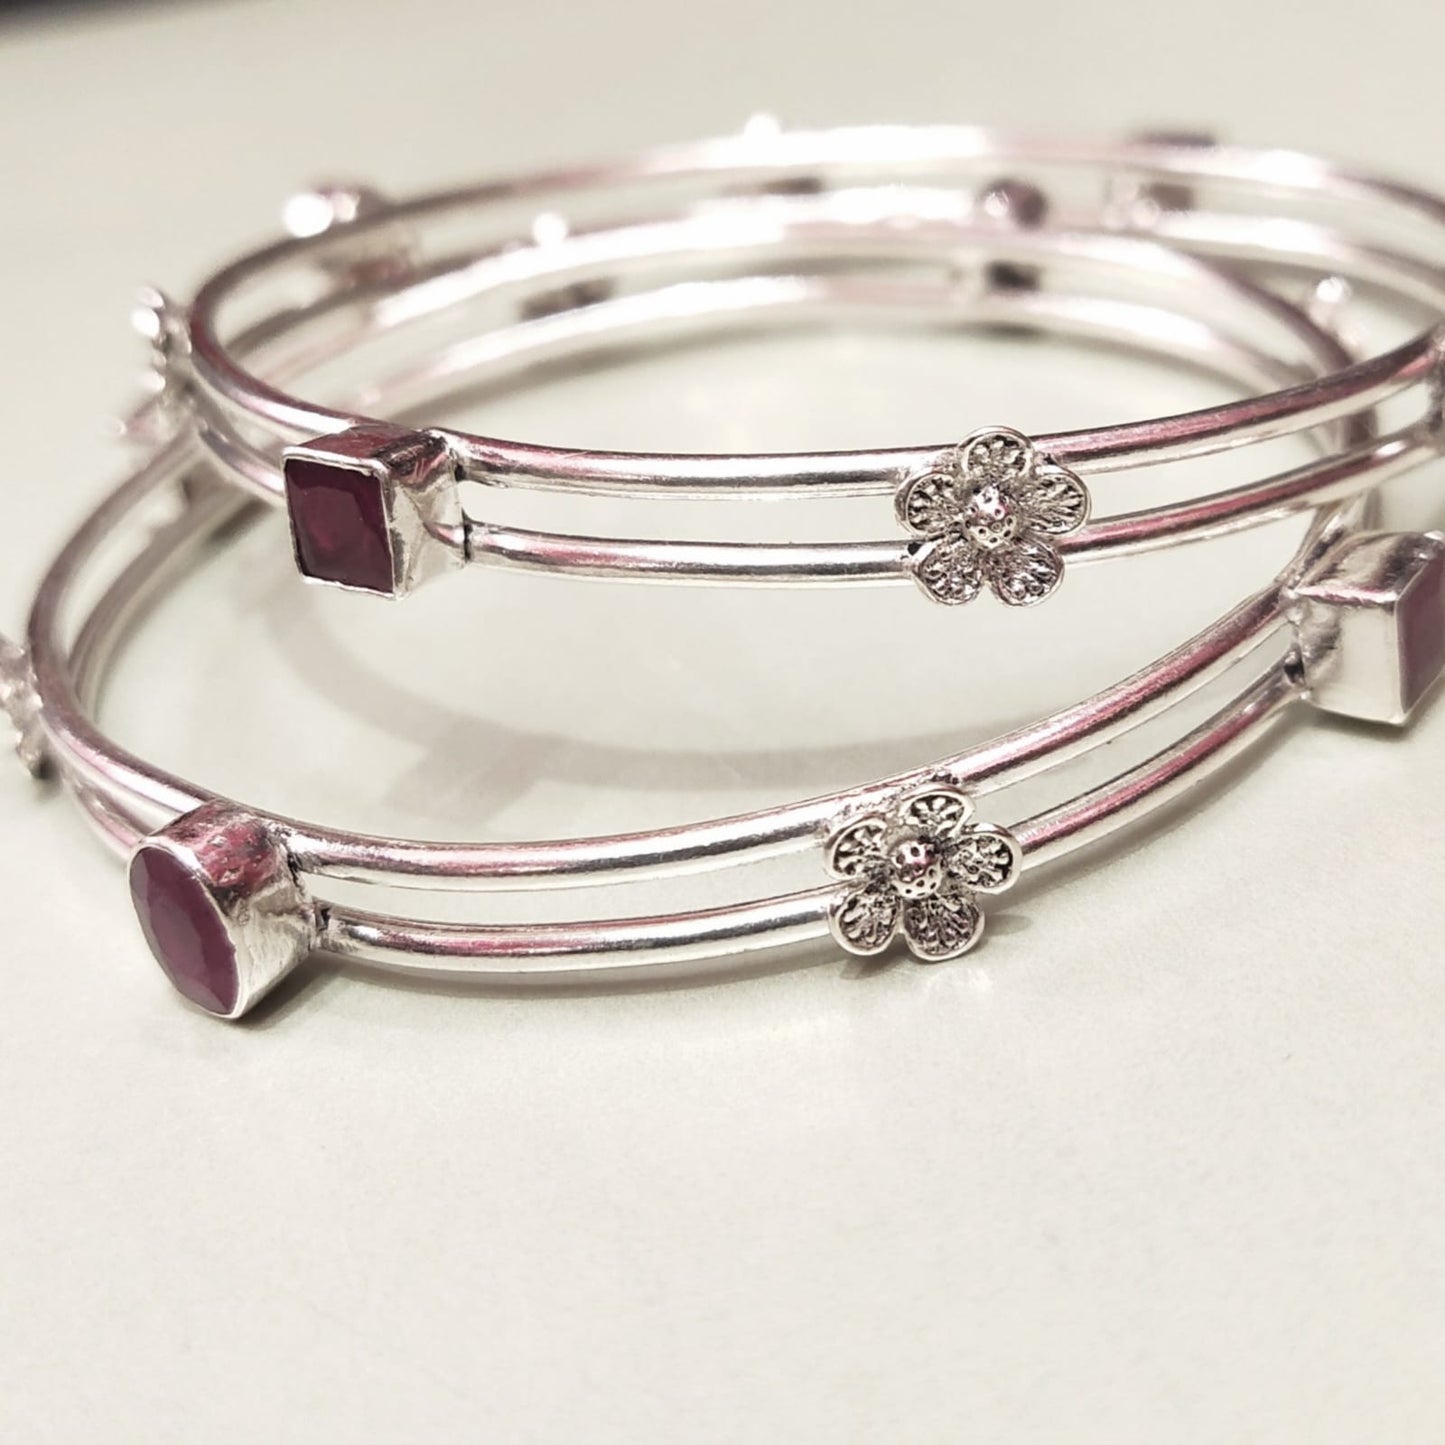 Dazzling Elegance: Adorn Your Wrists with Exquisite 92.5 Silver Ruby Bangles